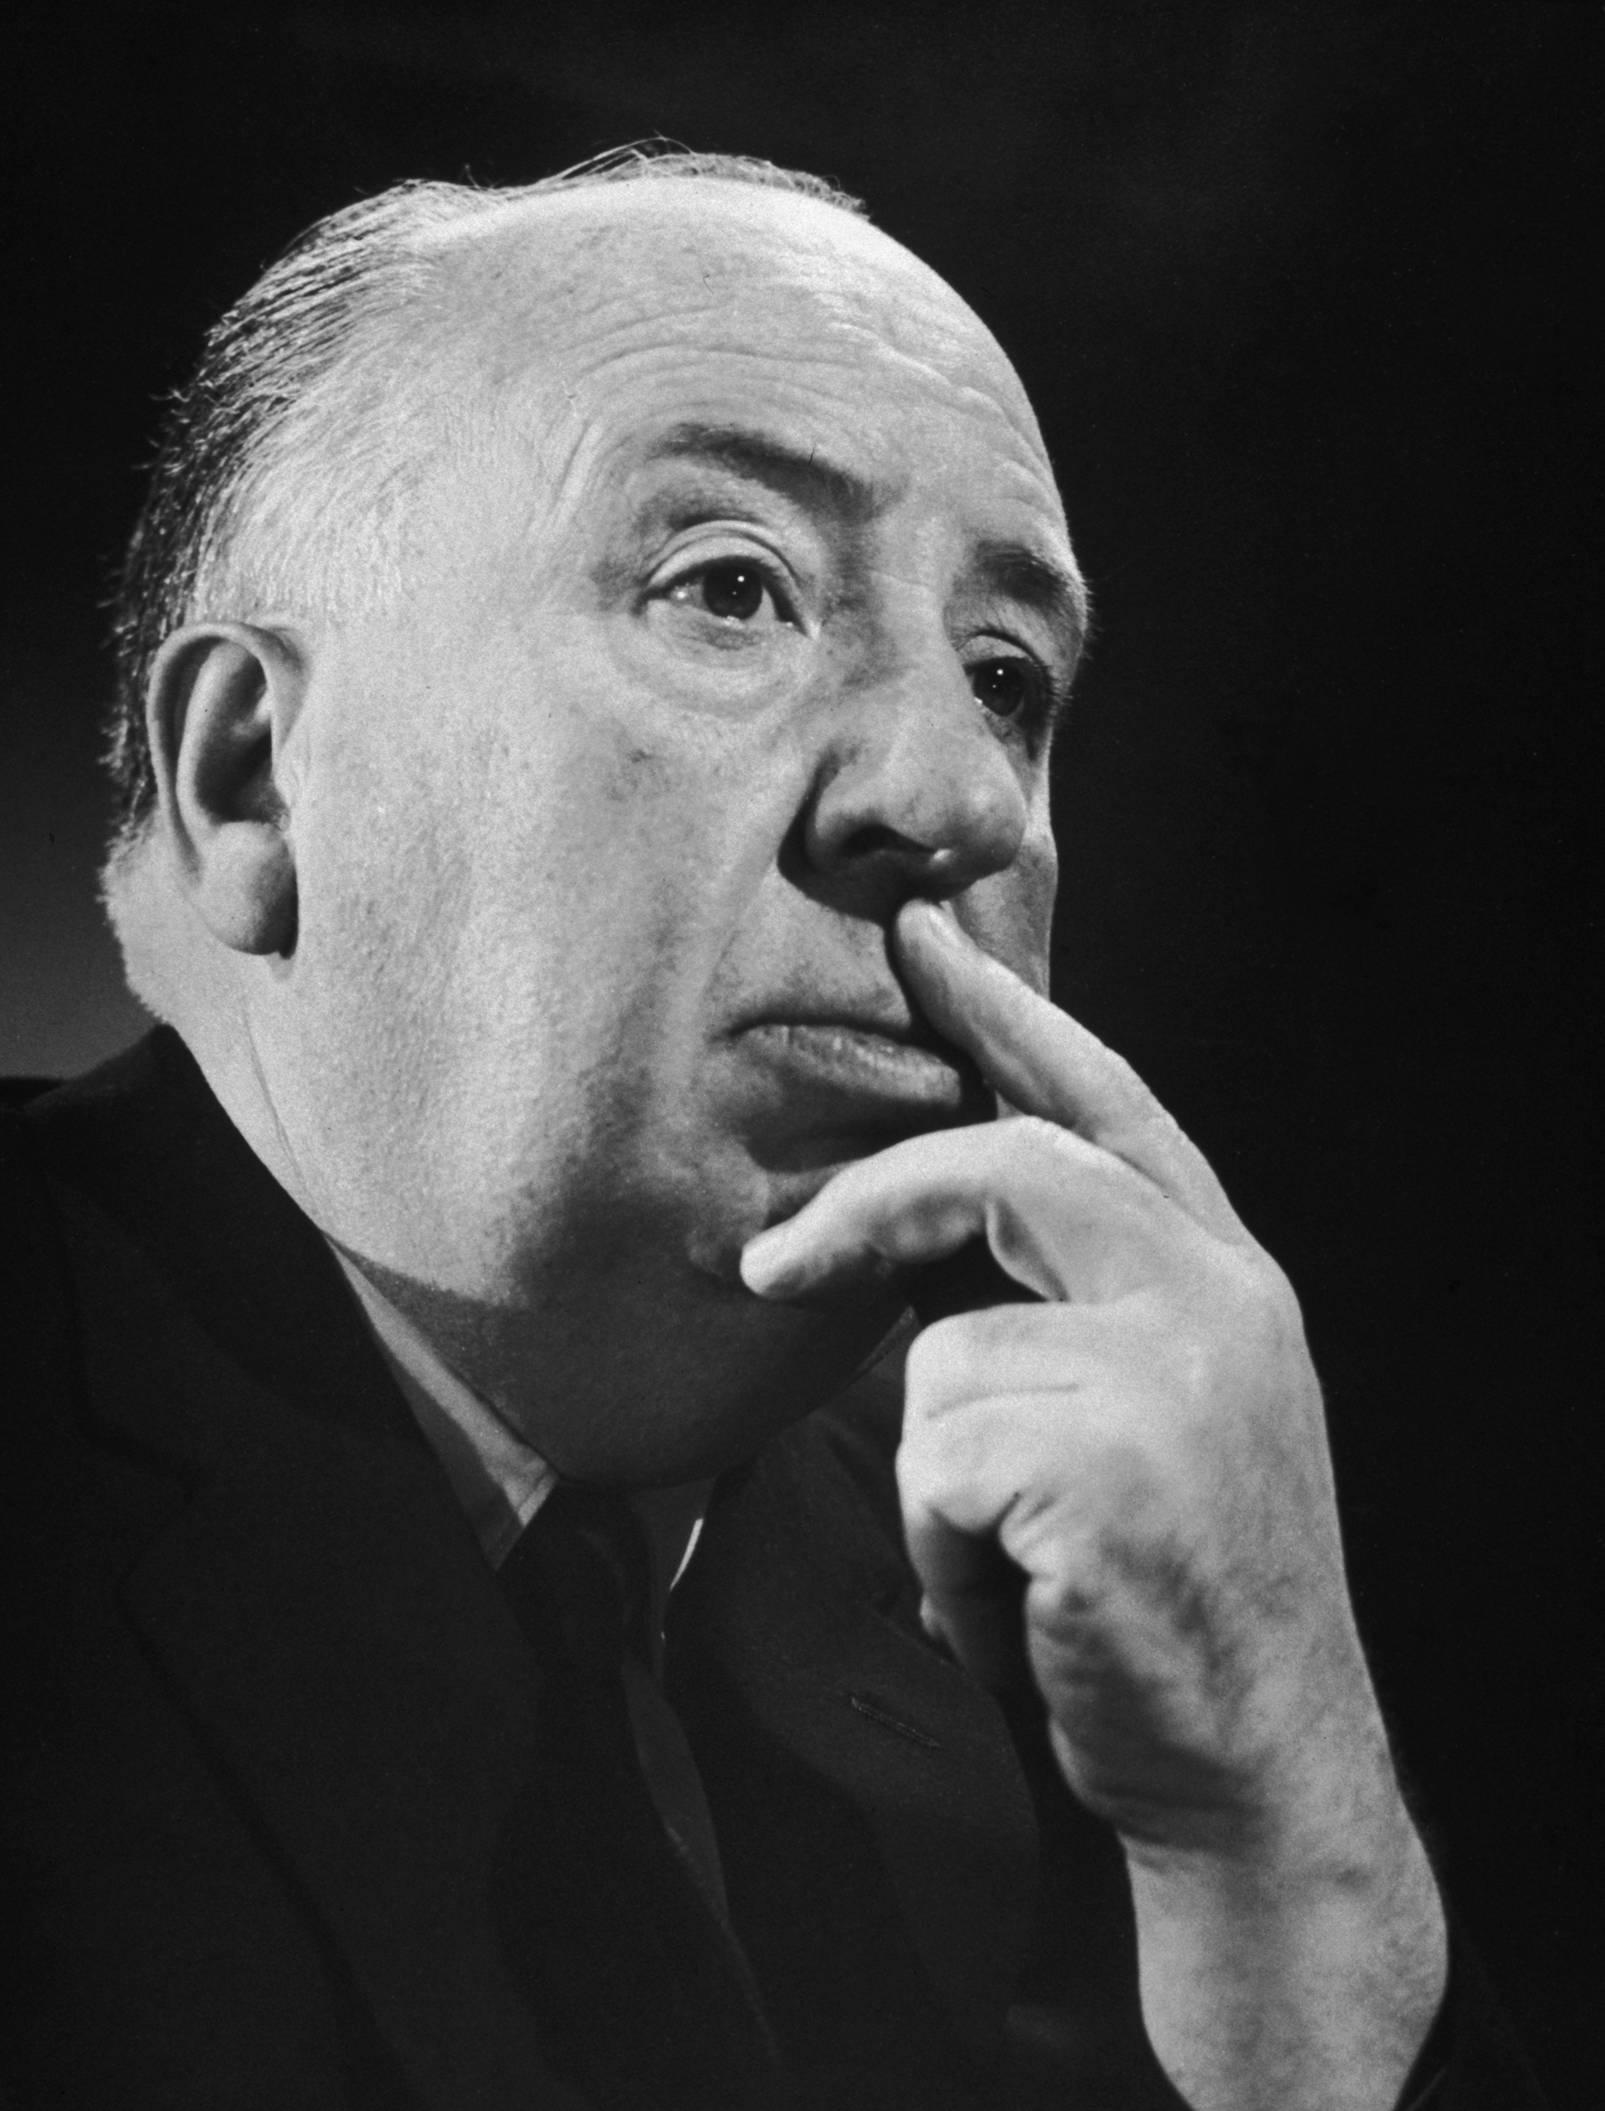 Wallpaper Of The Day: Alfred Hitchcockx2111 Alfred Hitchcock Pic